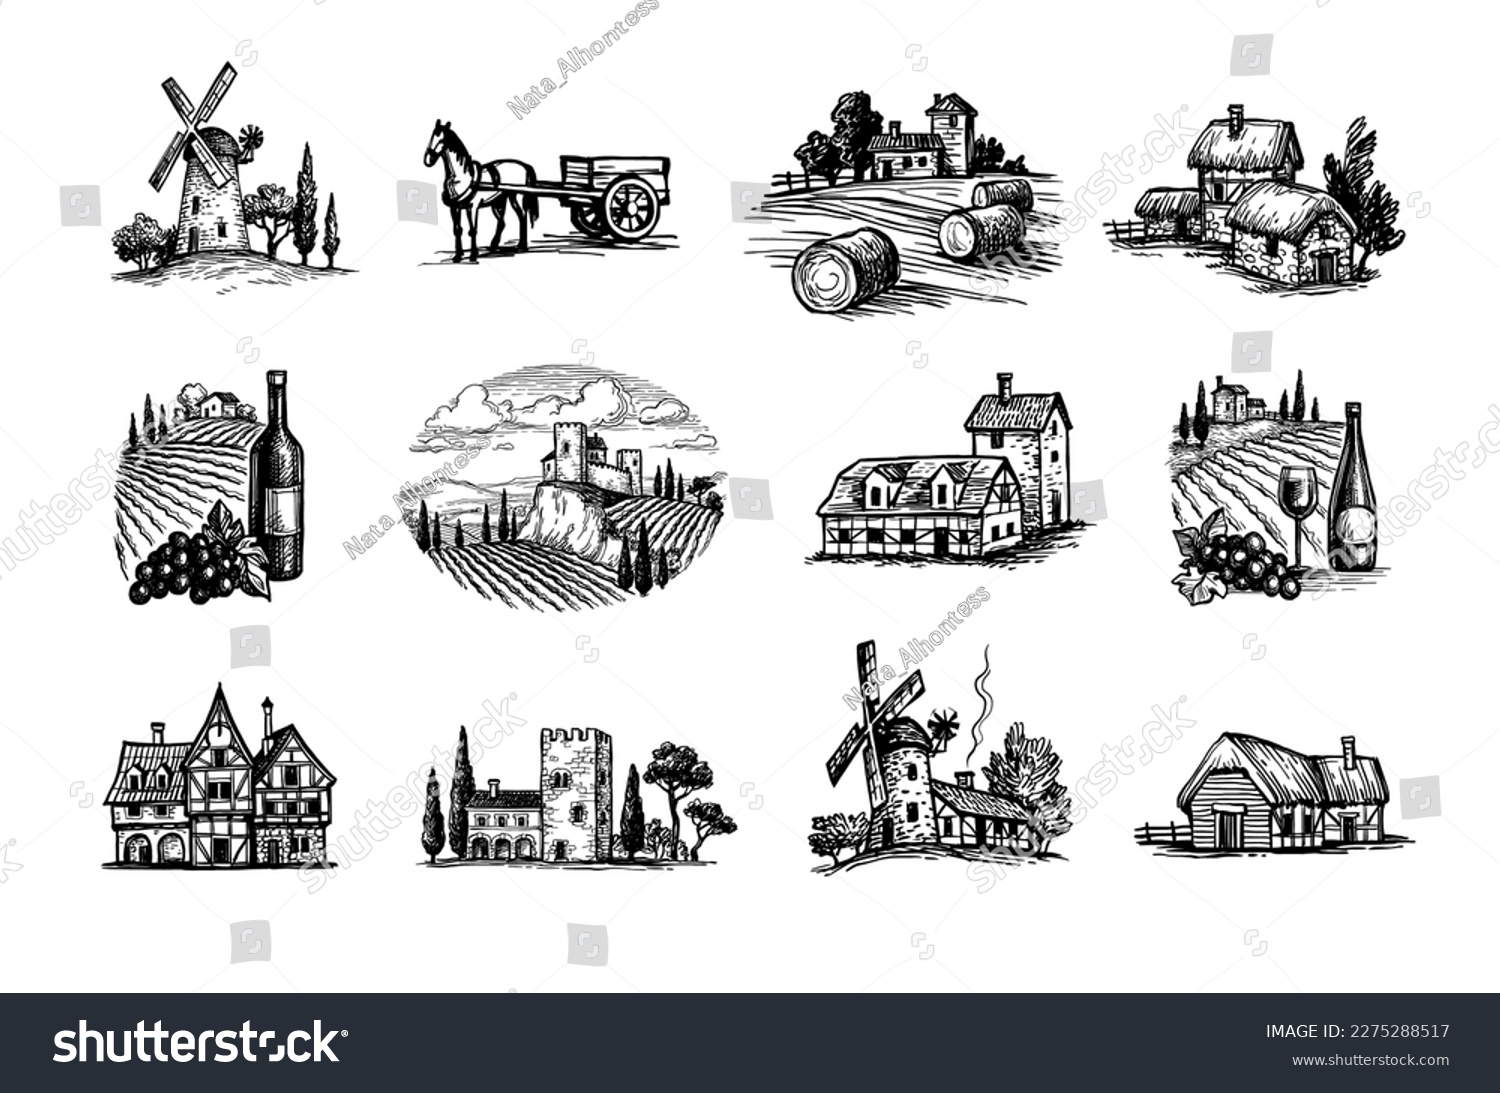 SVG of Village scenery. Mills, fields and vineyards. Hand drawn ink sketches. Vintage style. svg